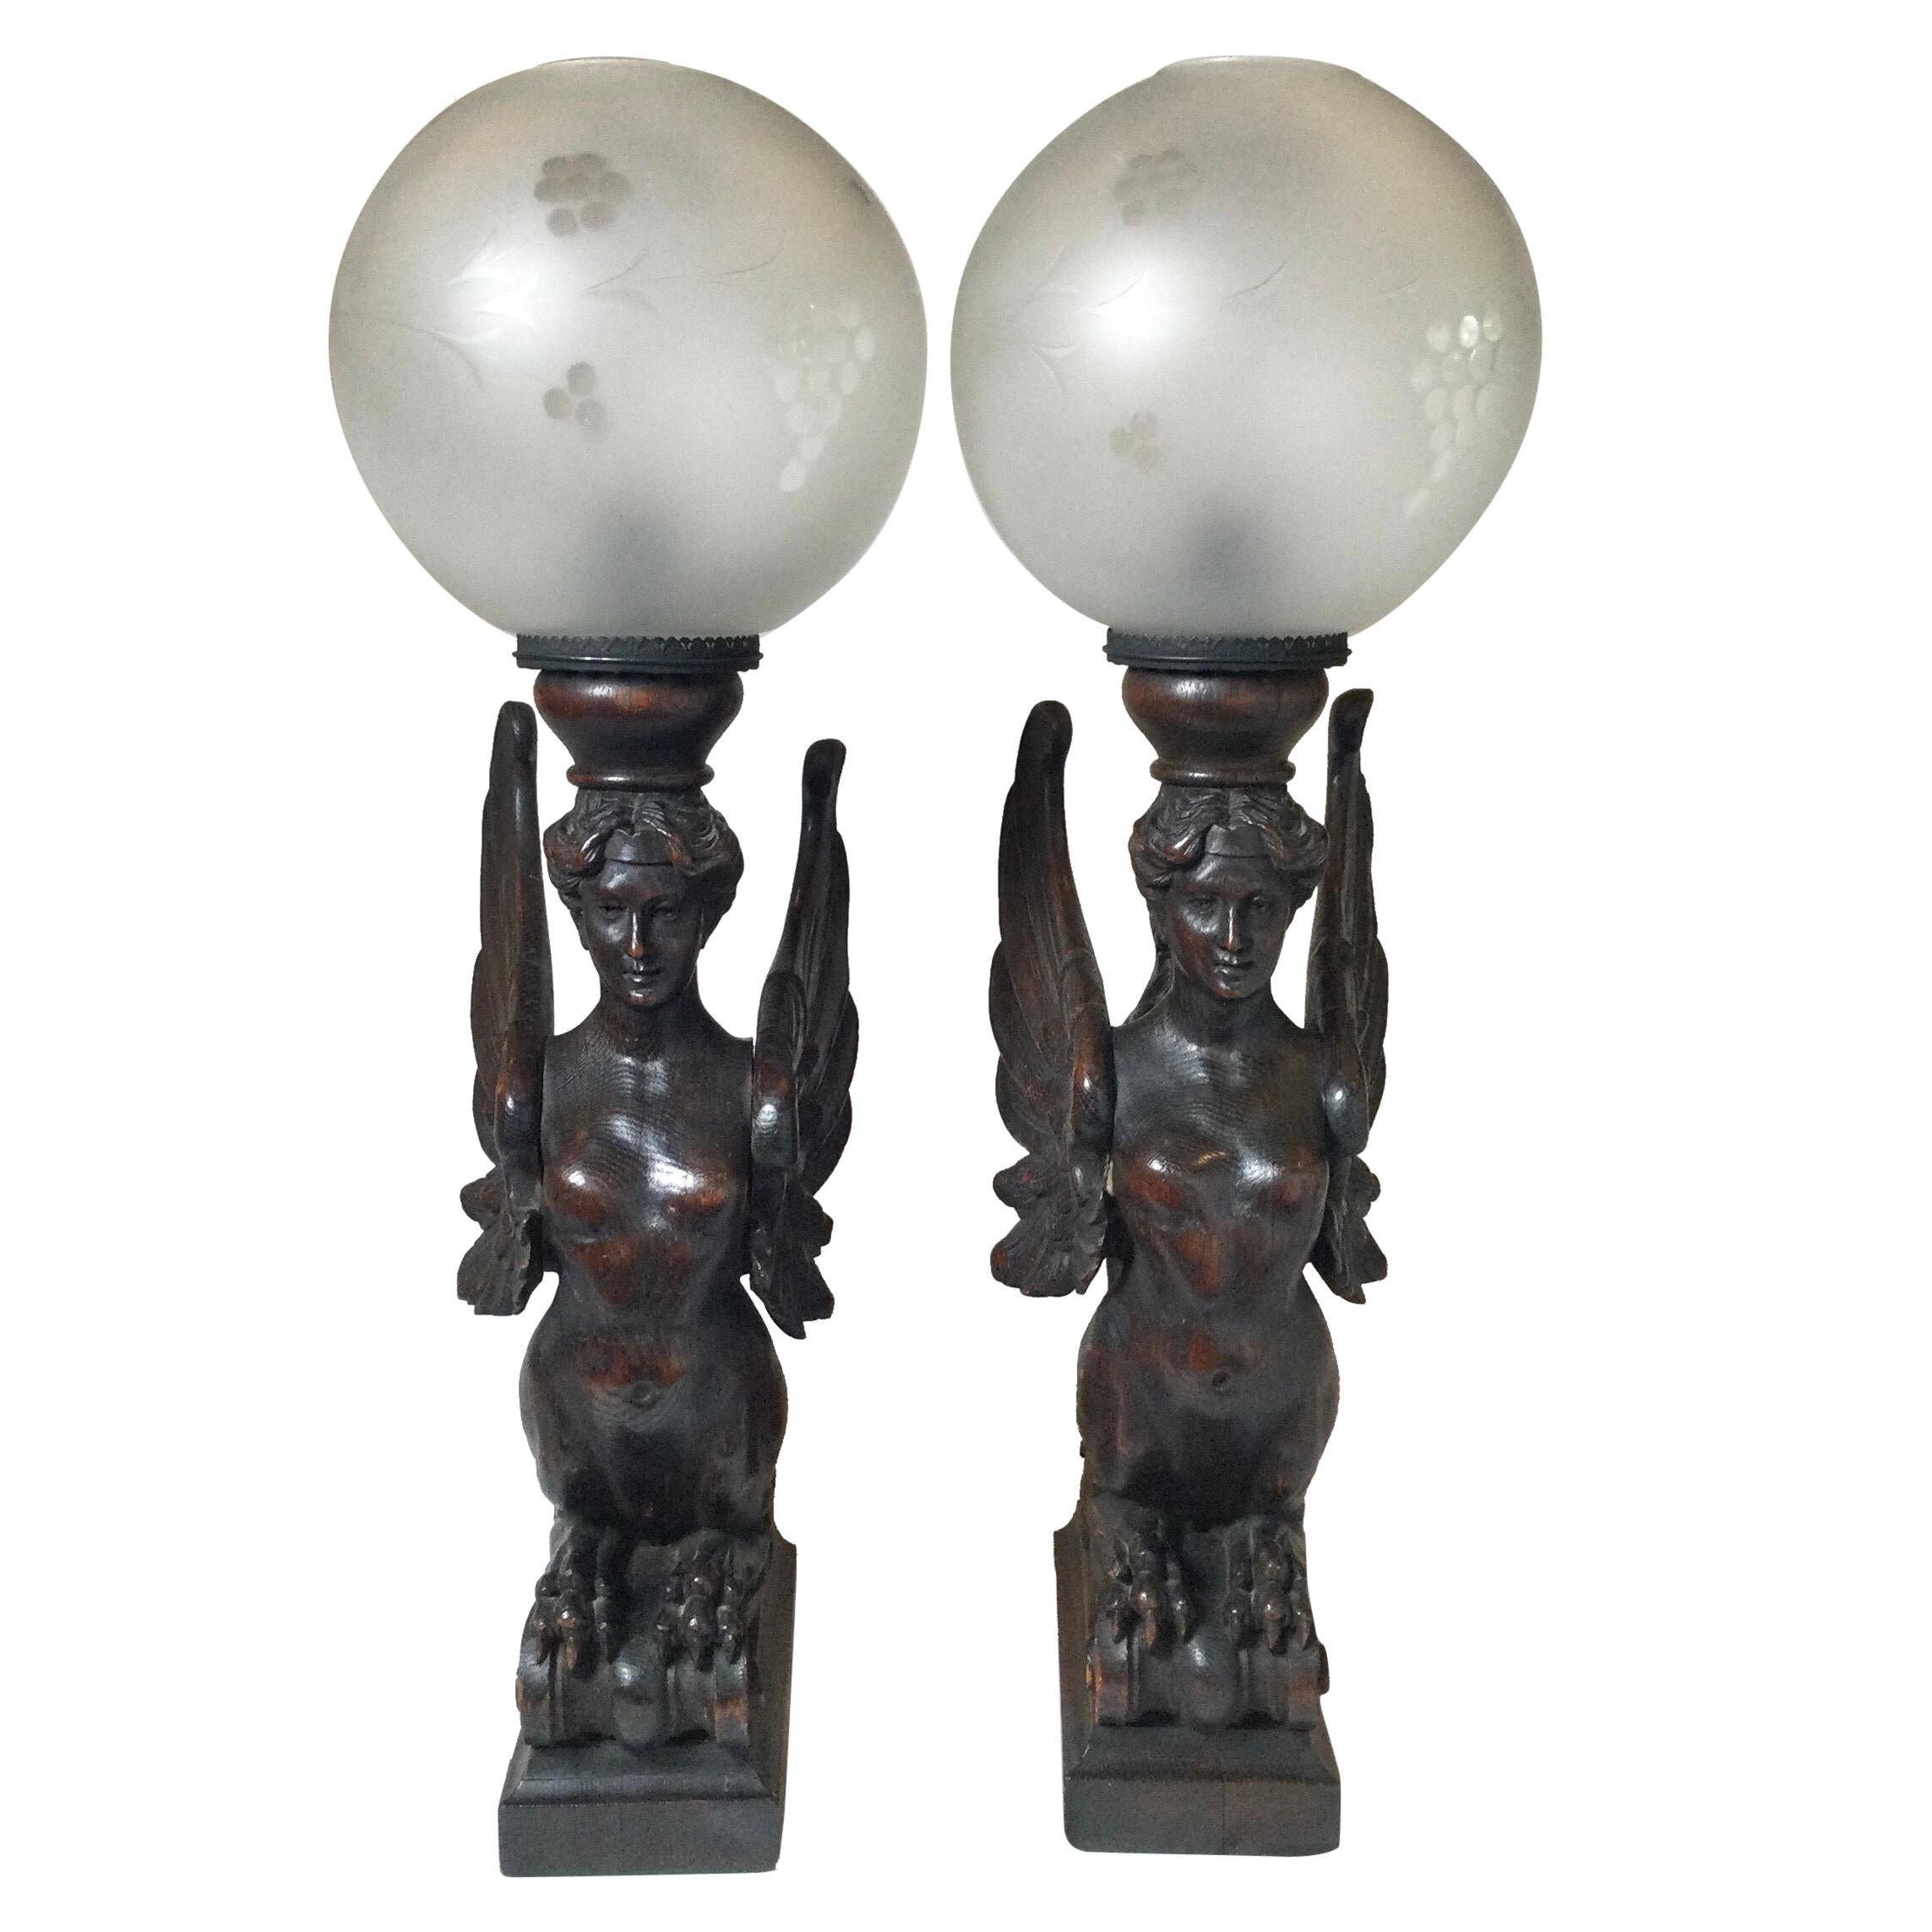 Circa 1880 Pair of Great Hand Carved Wood Winged Caryatids-Griffins Now as Lamps For Sale